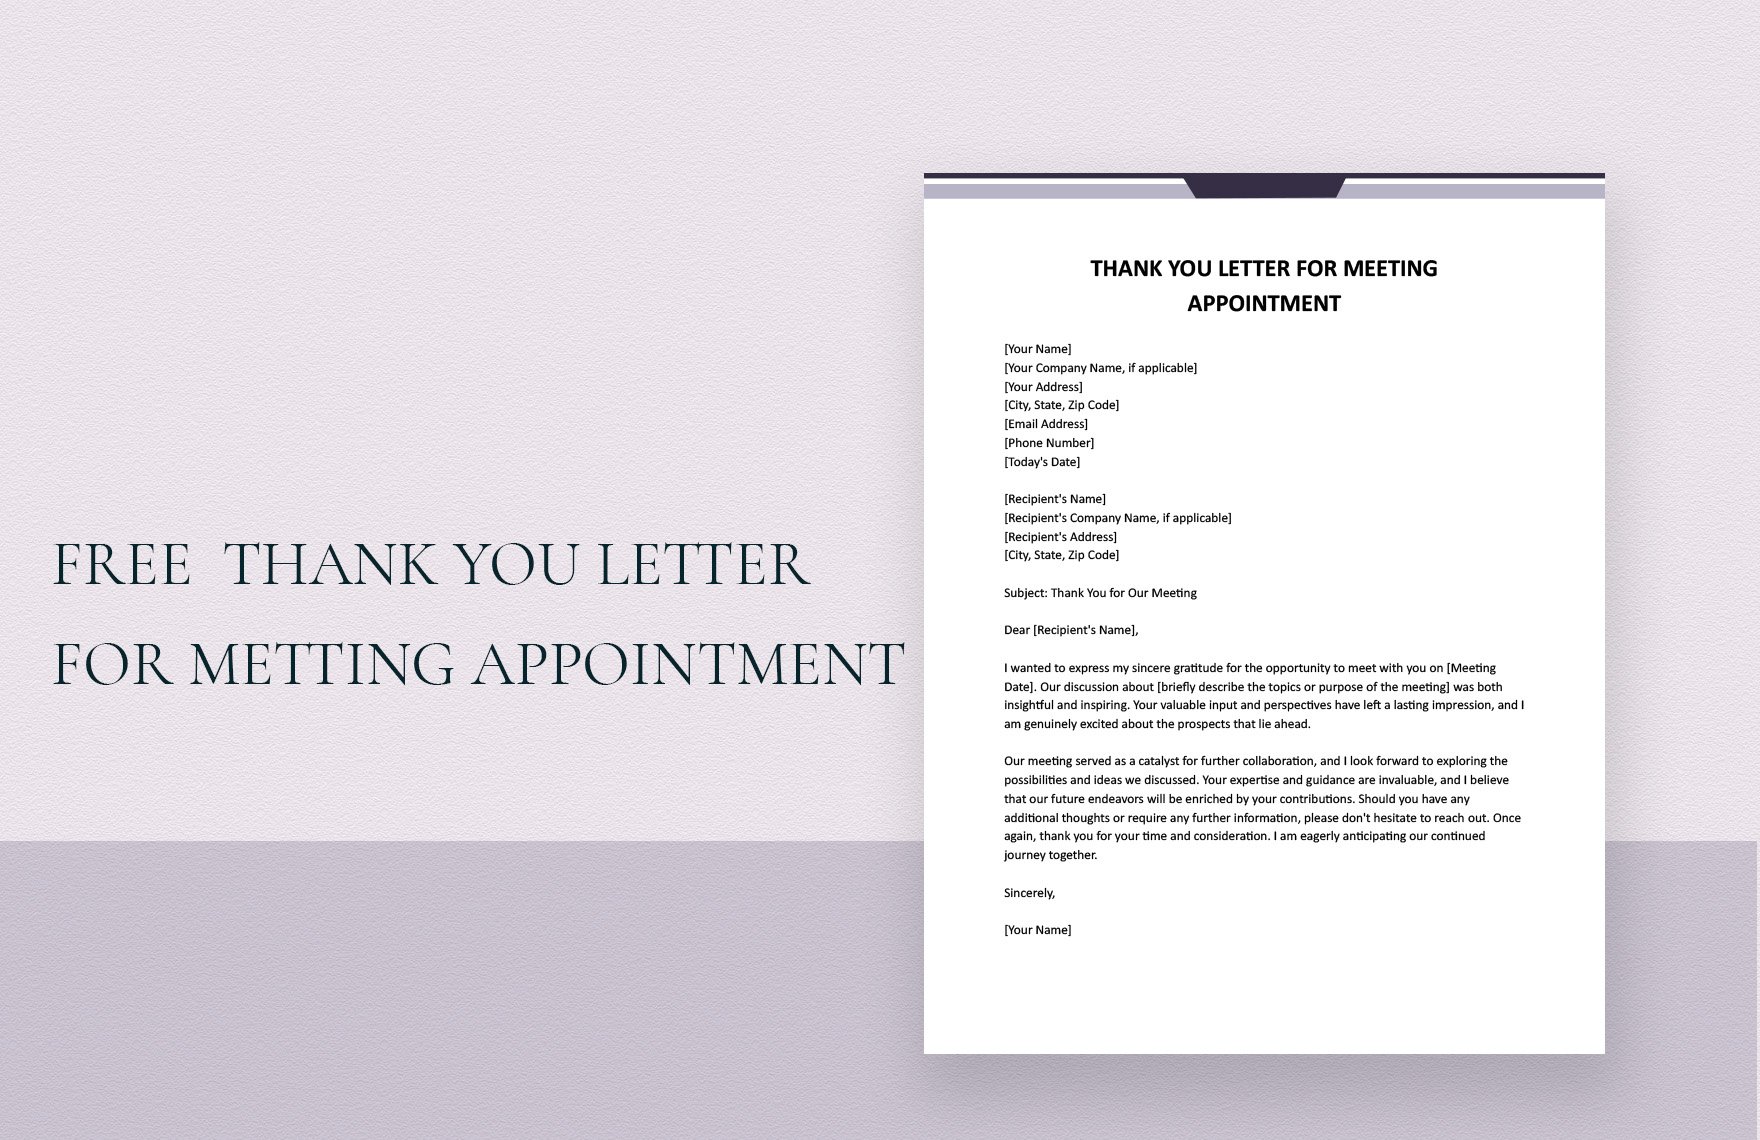 Thank You Letter For Meeting Appointment